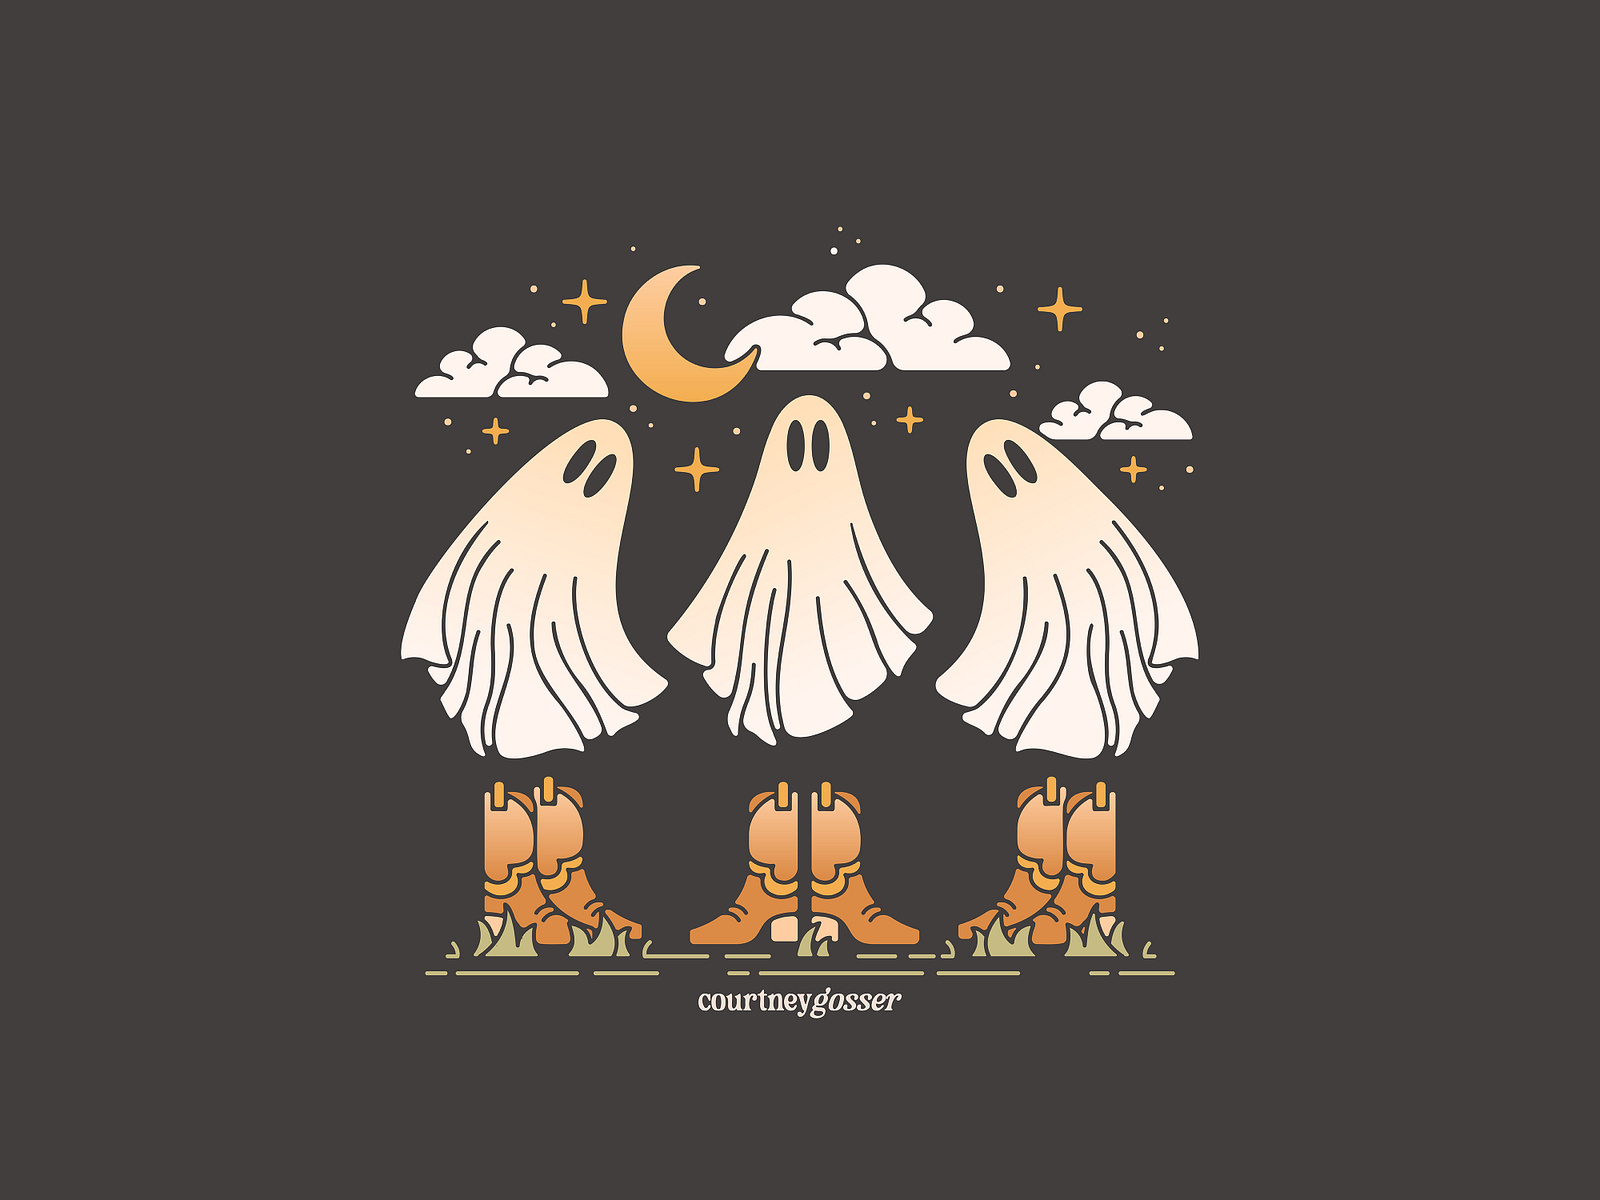 Ghostly Gang by Courtney Gosser on Dribbble